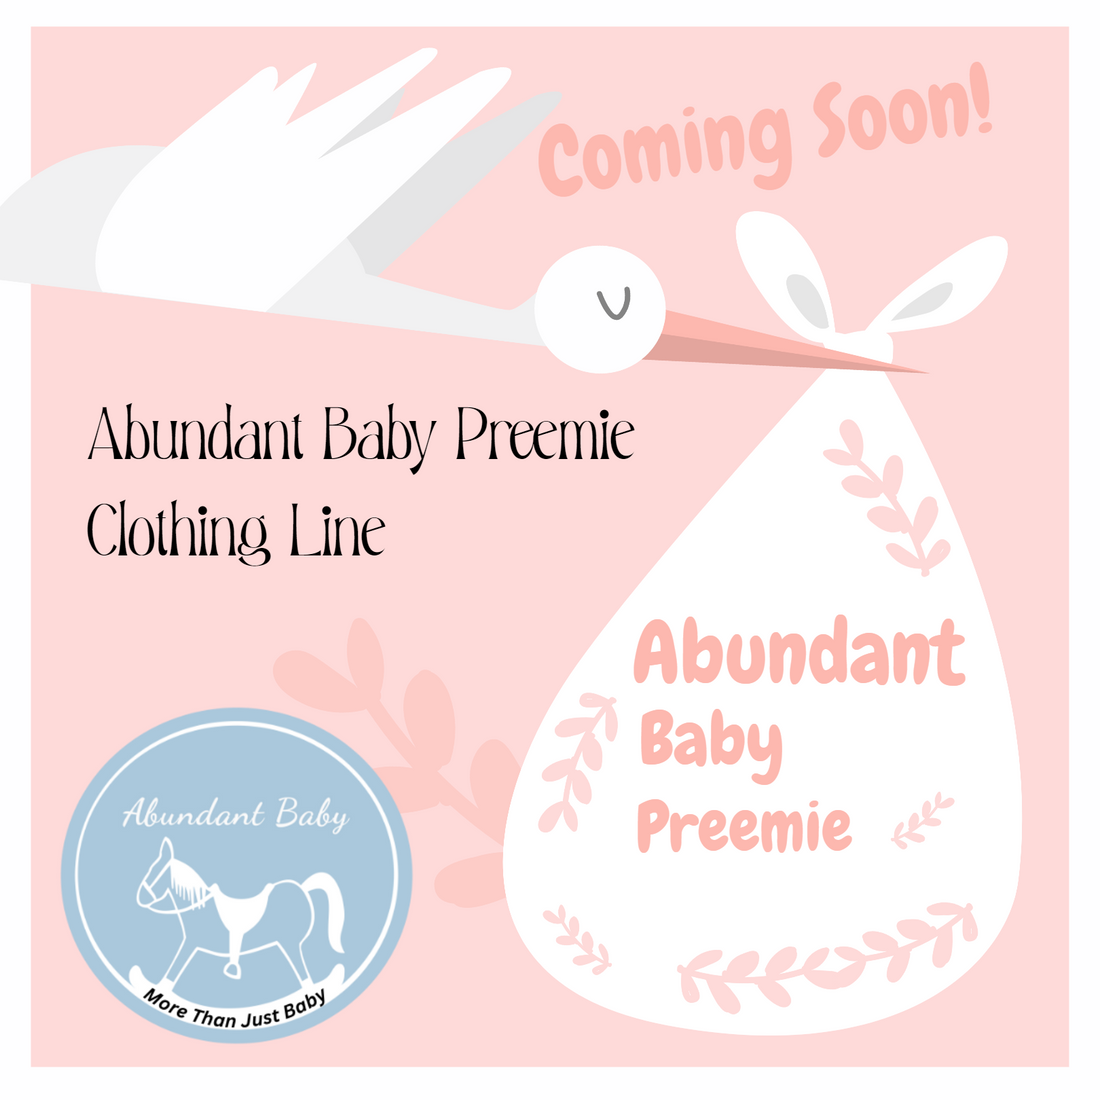 Addressing the Gap: Creating Our Very Own Abundant Baby Preemie Clothing Line